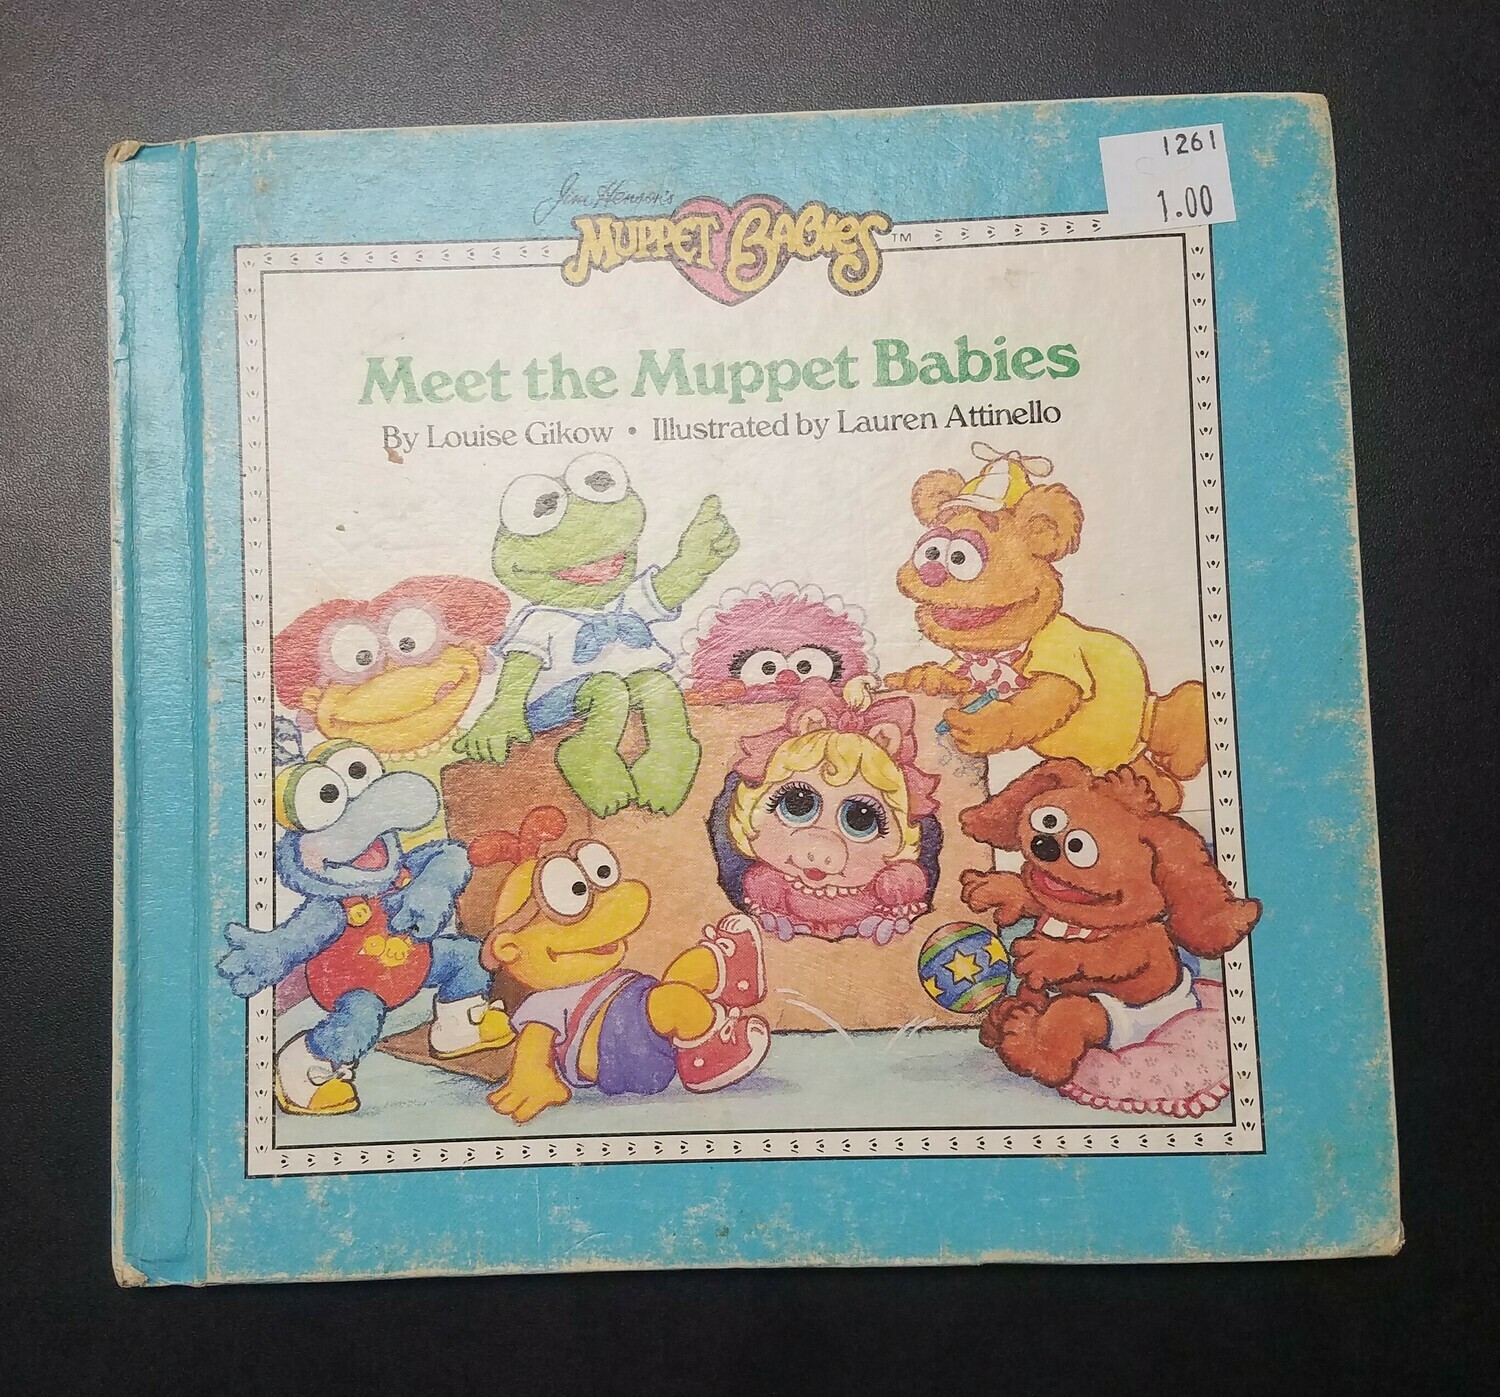 Meet the Muppet Babies by Louise Gikow